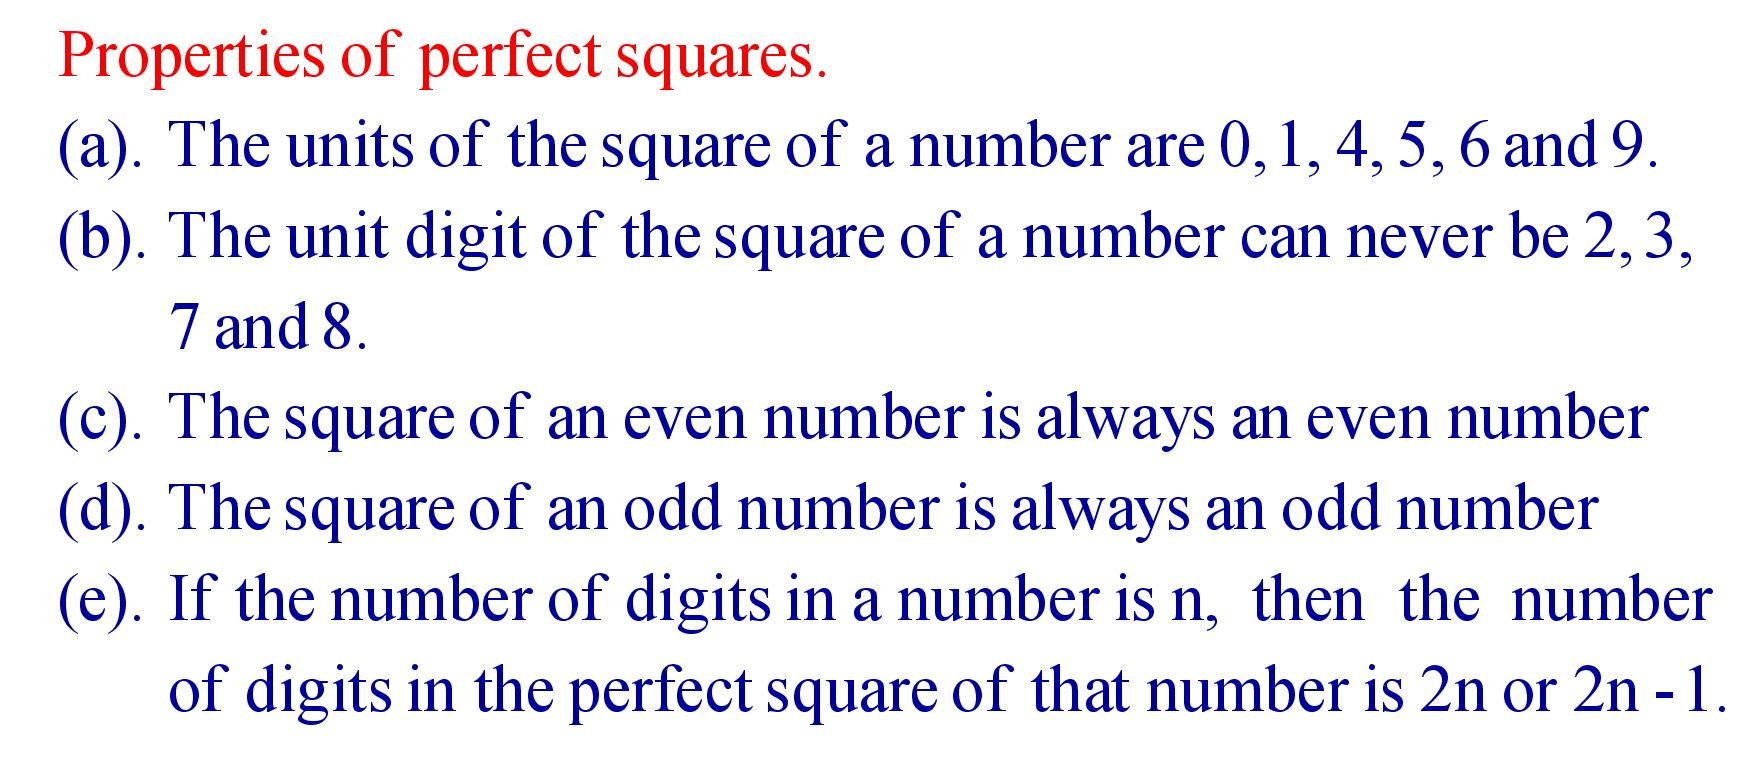 Properties of Perfect Squares